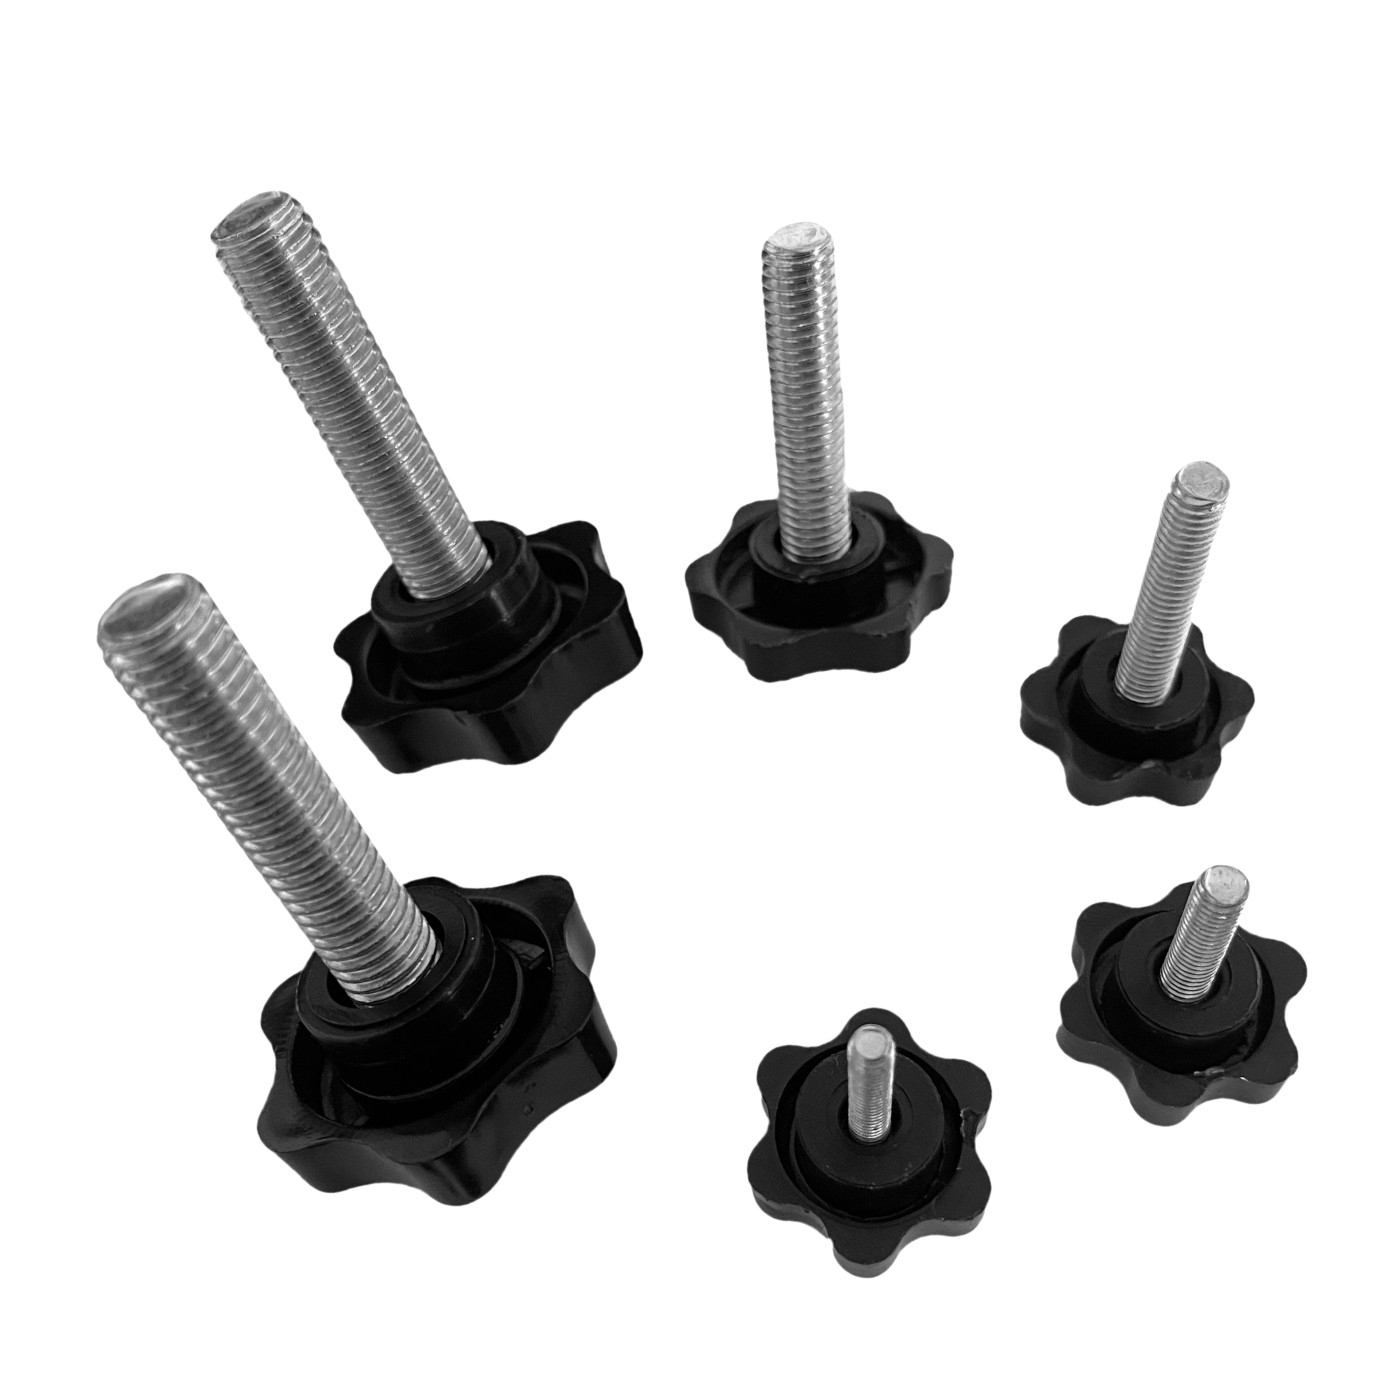 Set of 10 star knobs with threaded rod (M5, black)